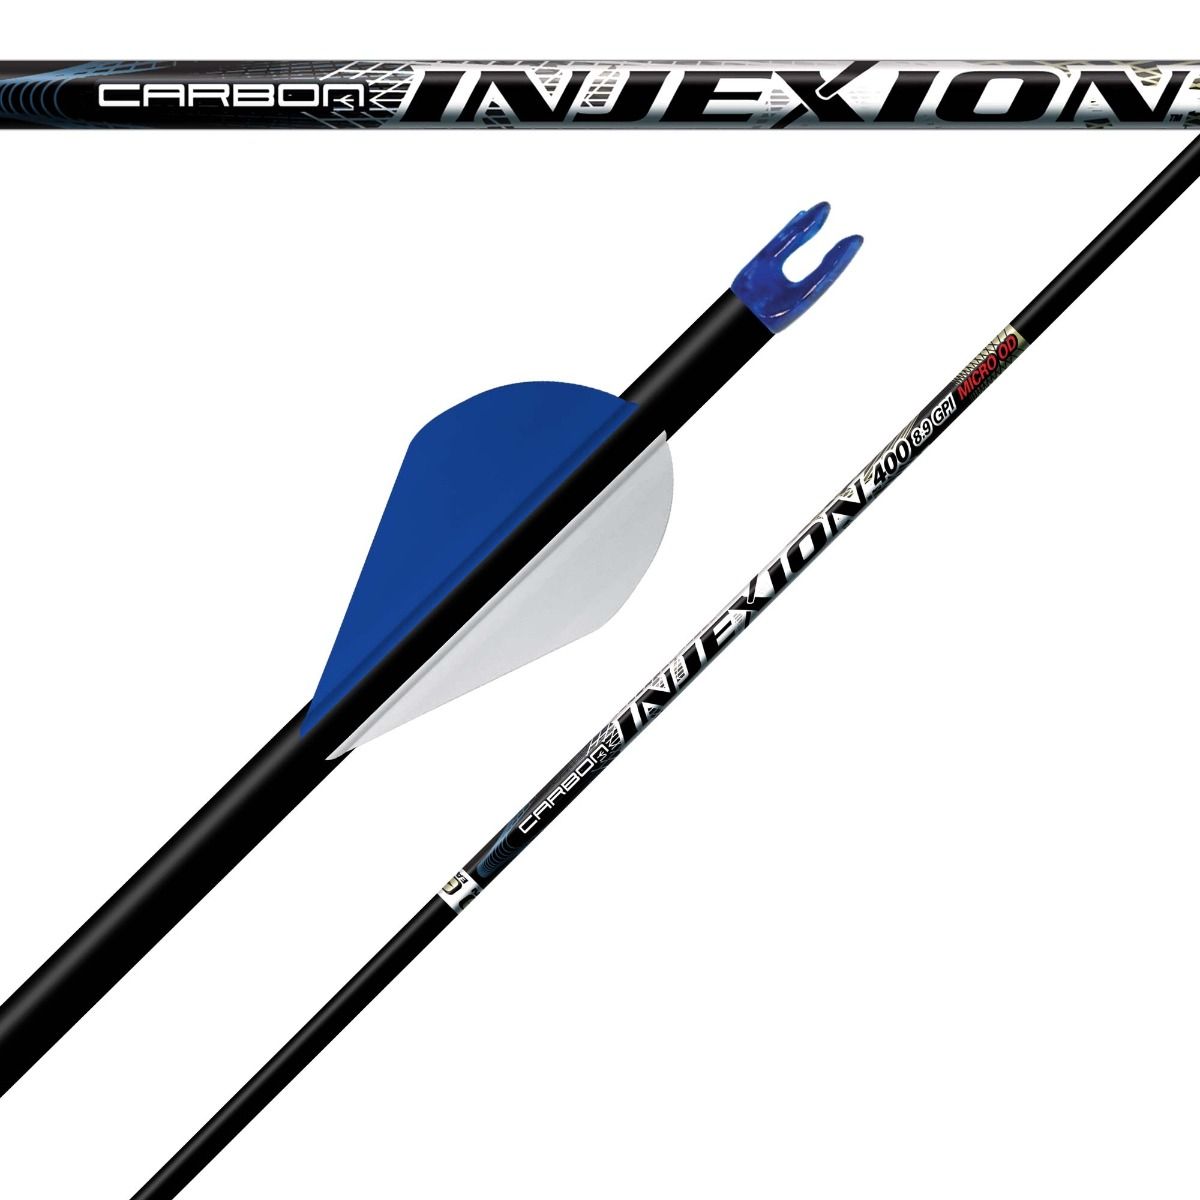 Easton 4MM Carbon Injexion 480 Arrows Shafts w/ Nocks and Inserts 6pk 